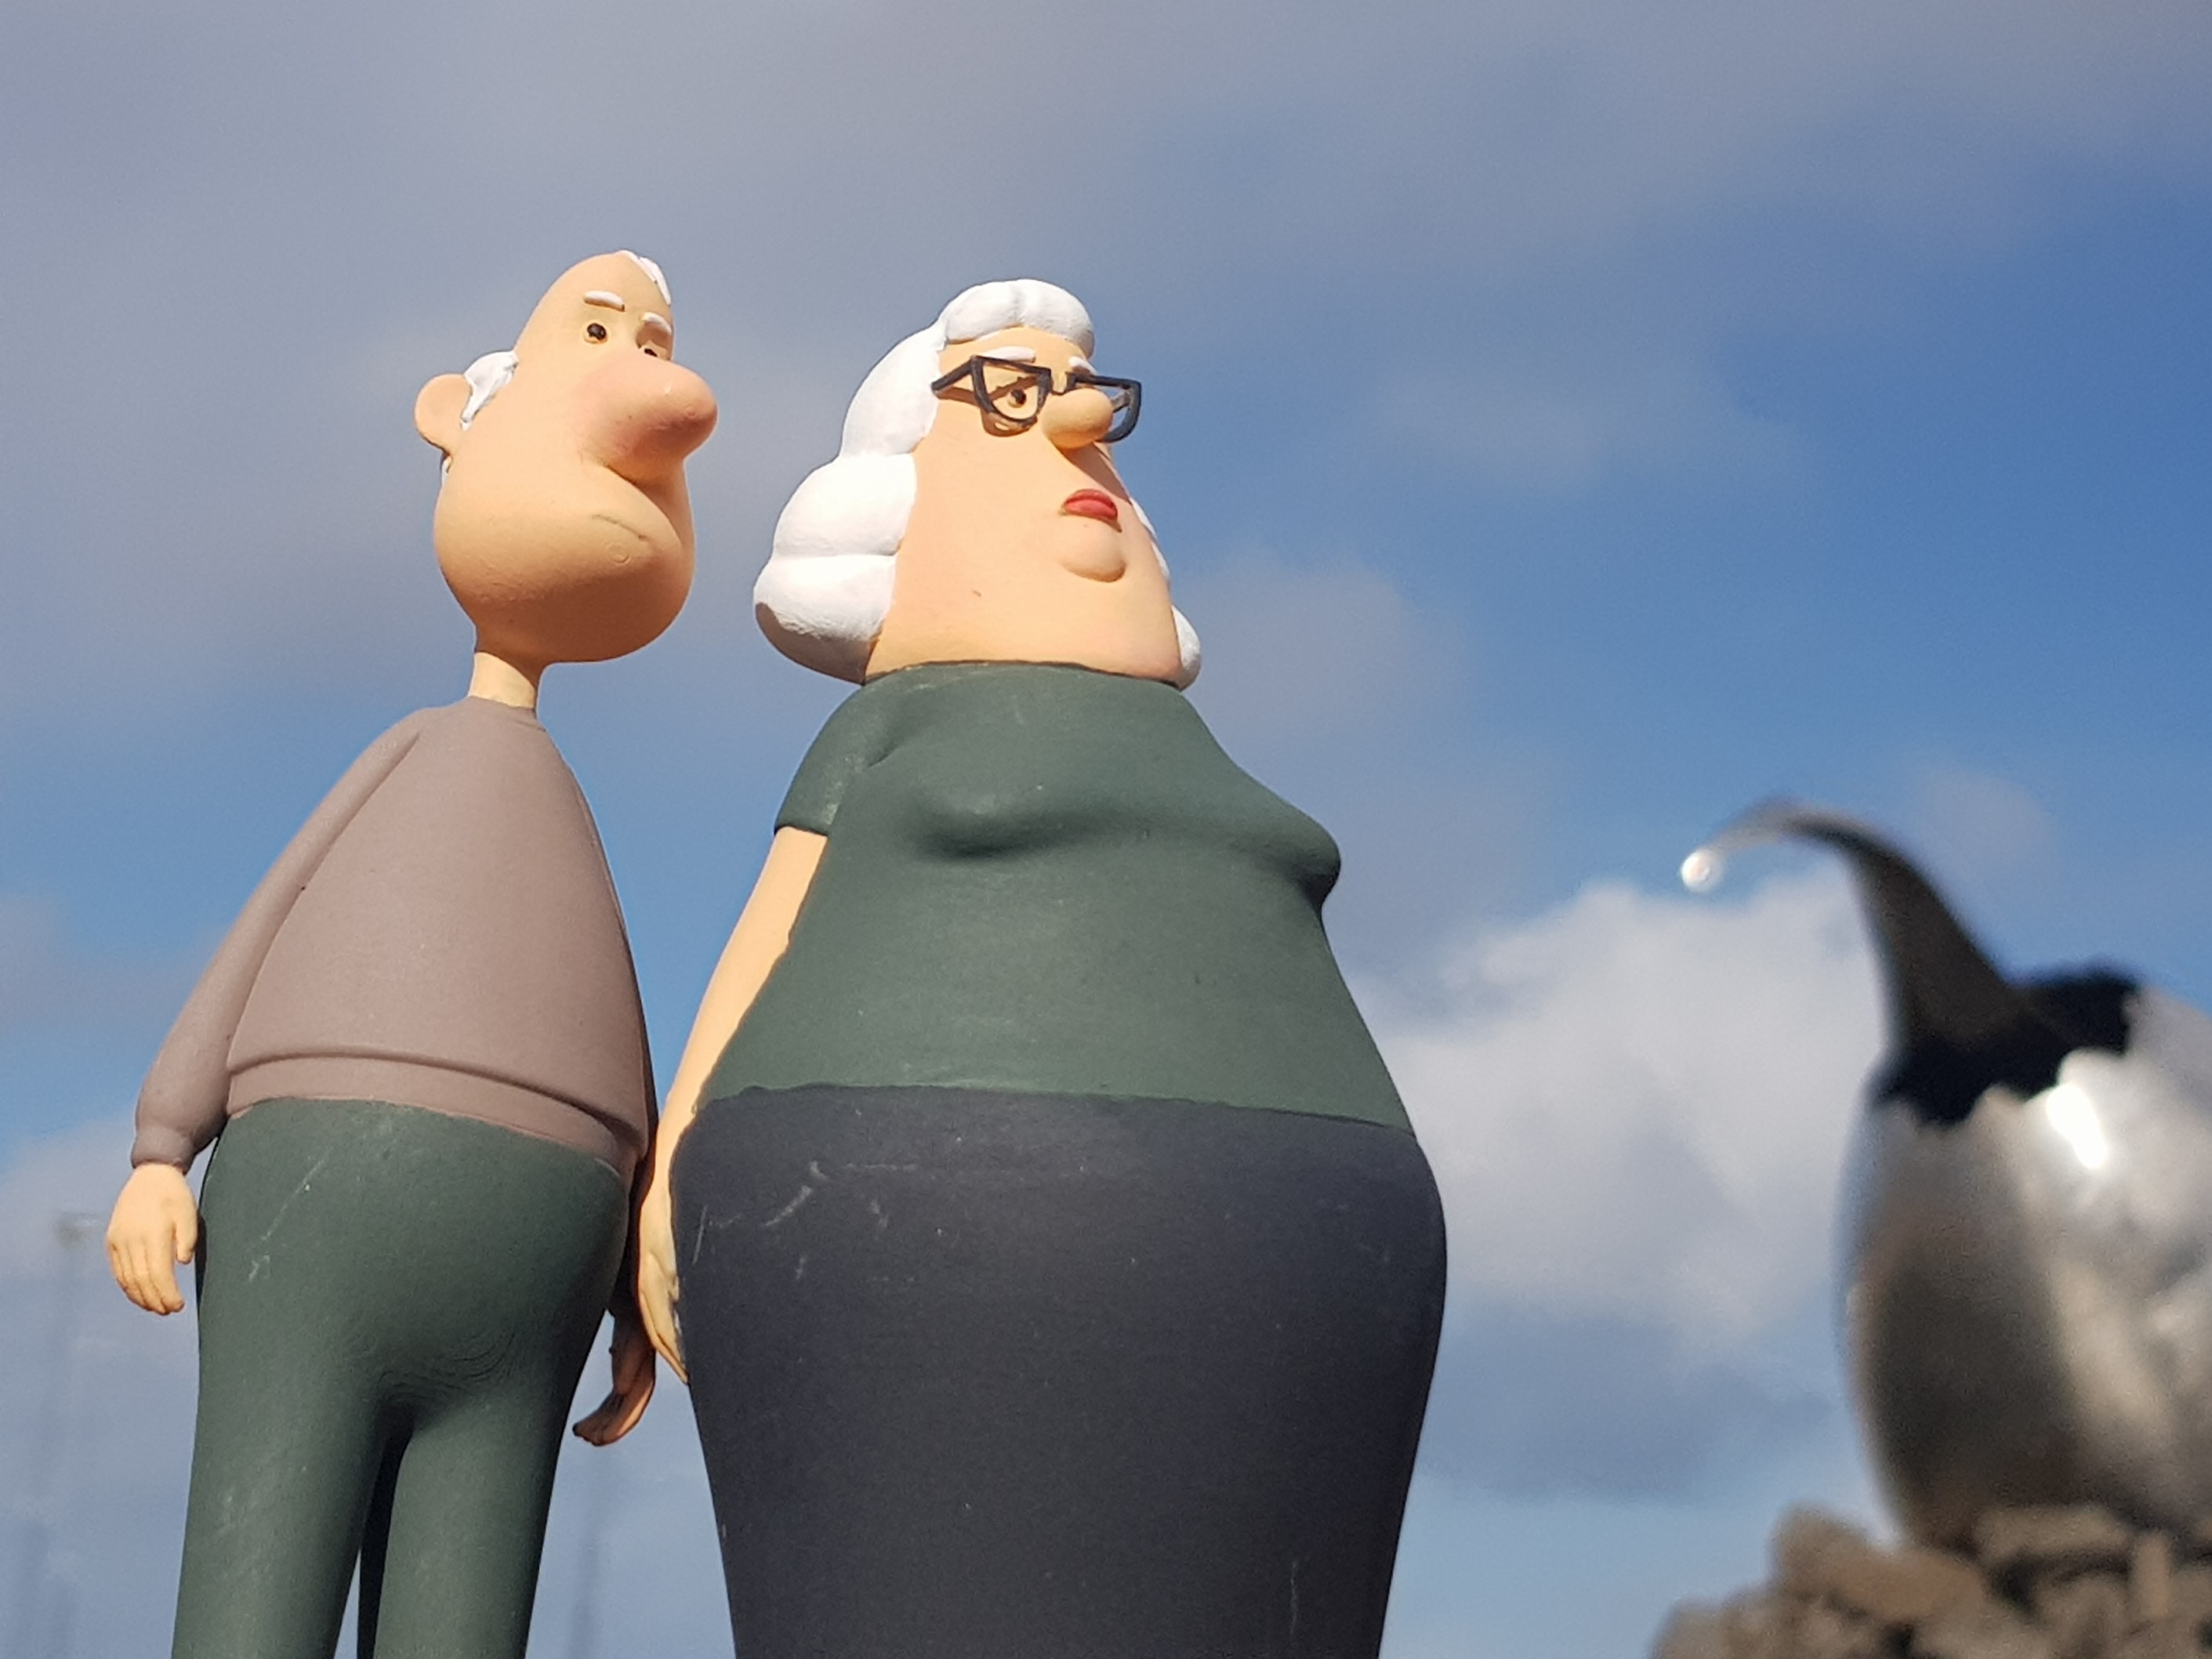 The Yes People, from the Icelandic short film of the same name, pictured from below with a blue sky above